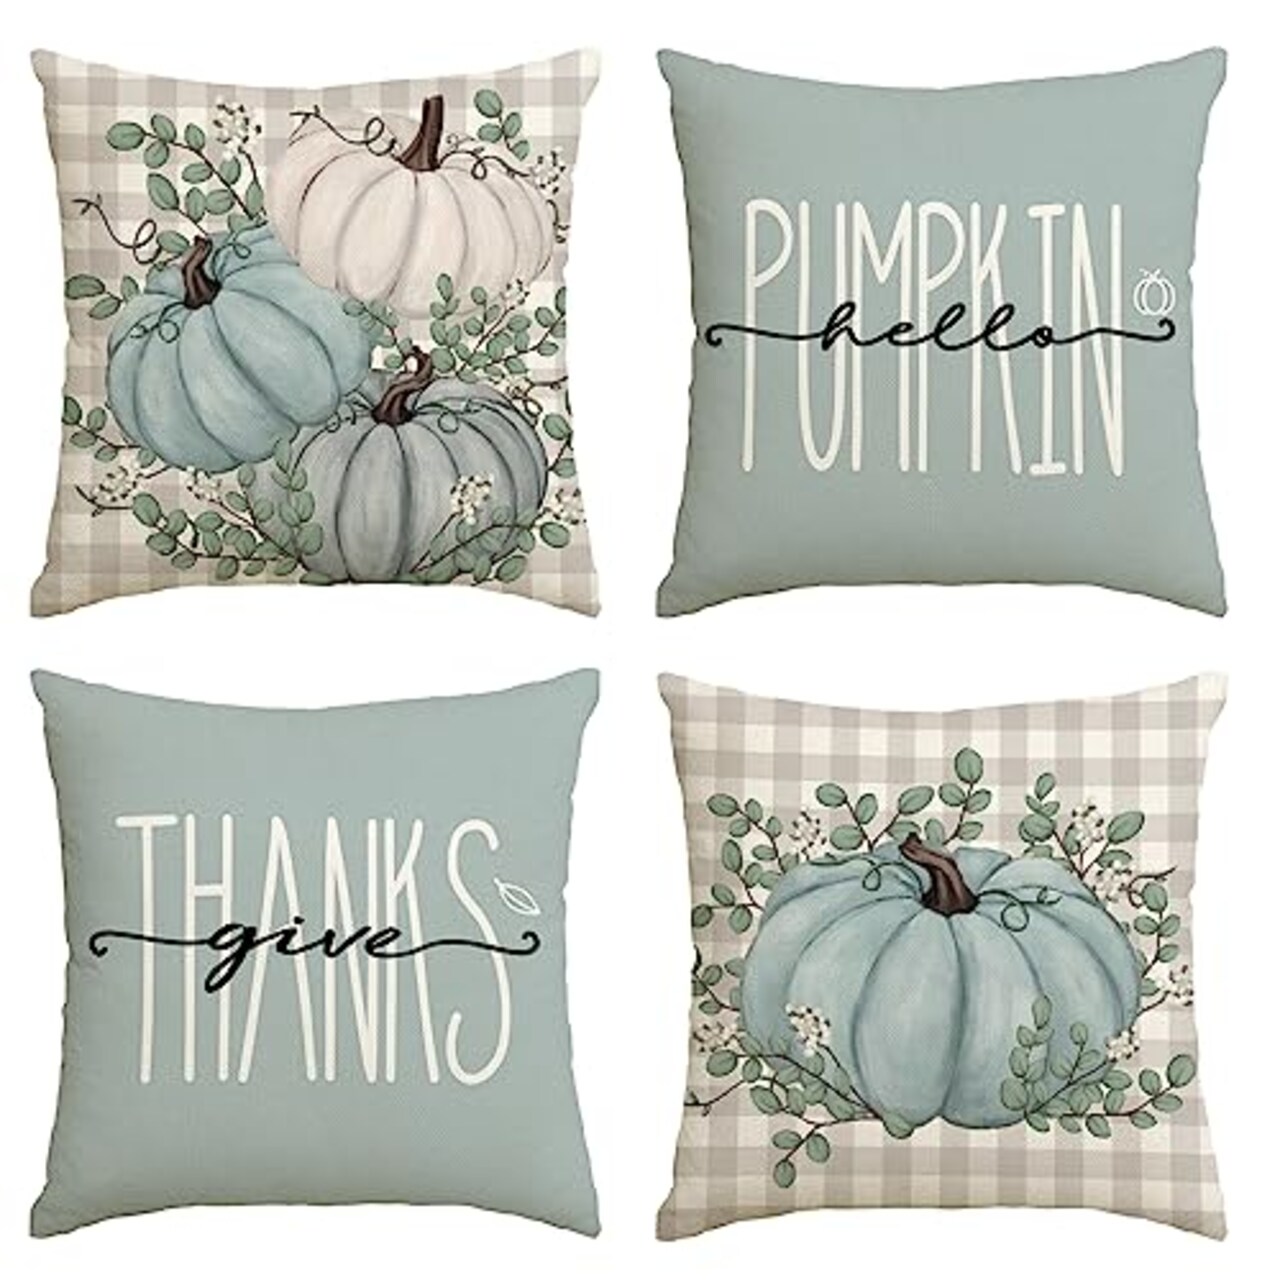 AVOIN colorlife Hello Pumpkin Give Thanks Throw Pillow Covers 18x18 Set of 4, Fall Autumn Thanksgiving Eucalyptus Leaves Harvest Decoration for Home